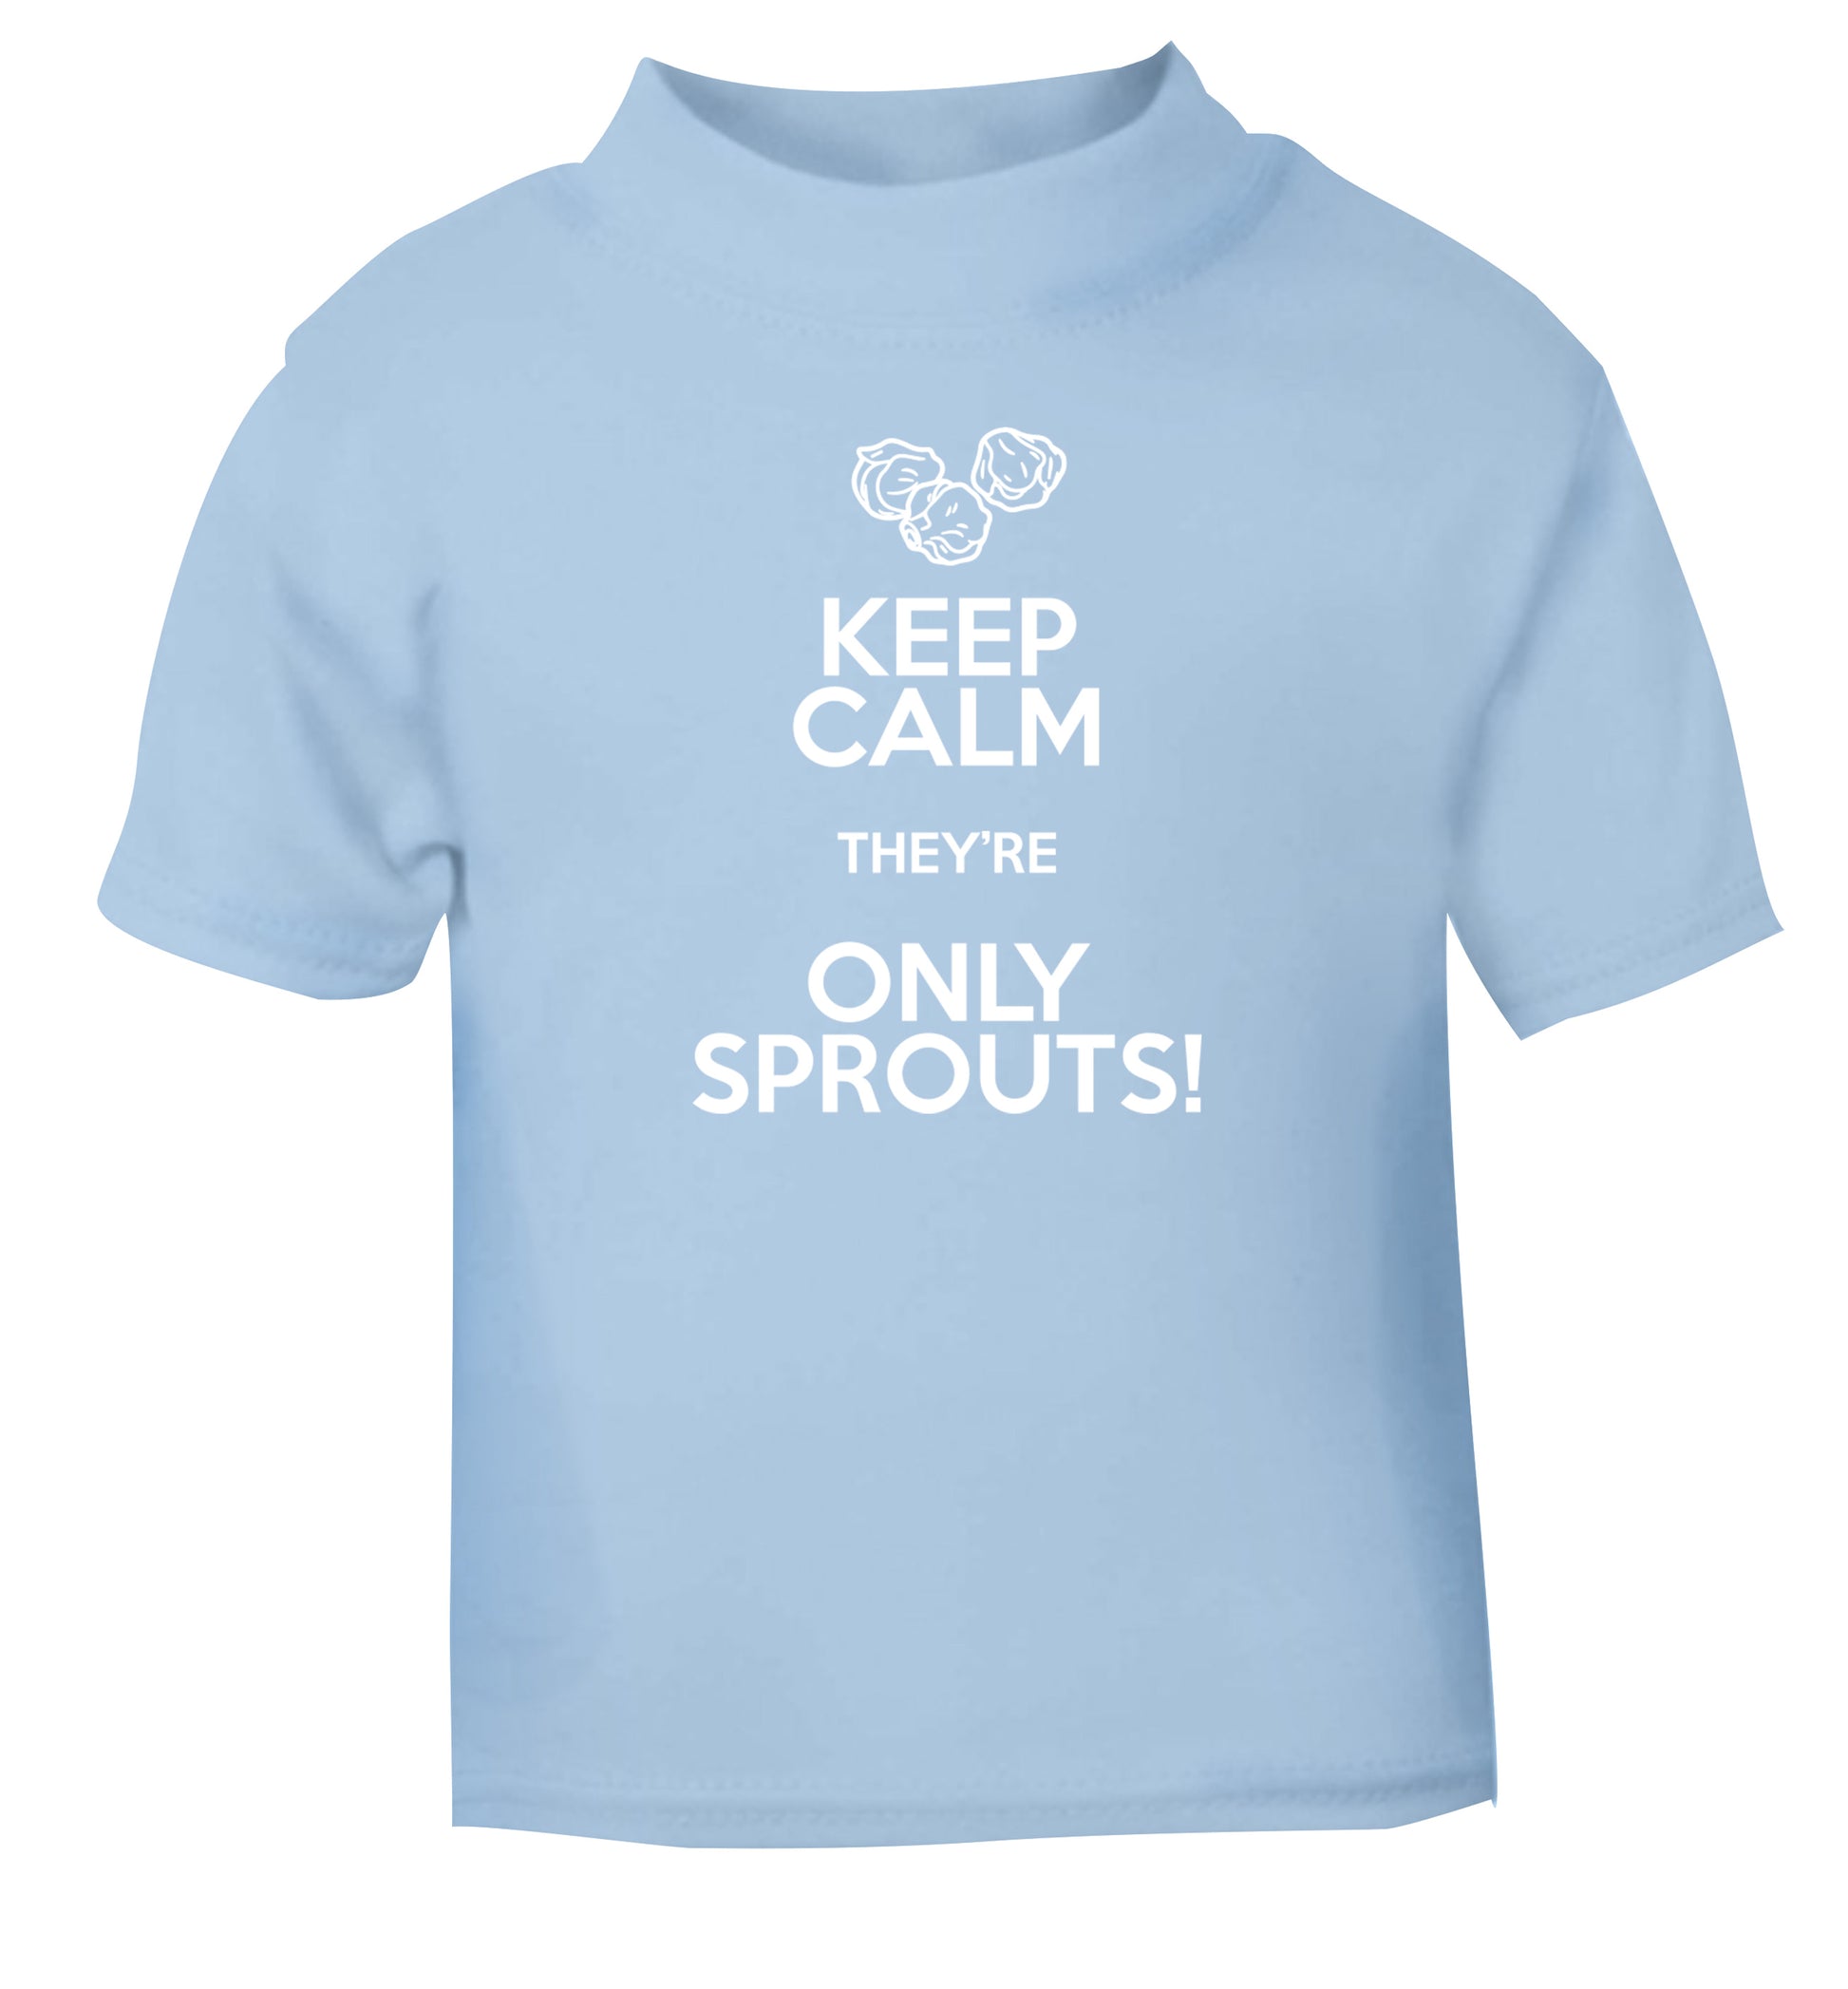 Keep calm they're only sprouts light blue Baby Toddler Tshirt 2 Years